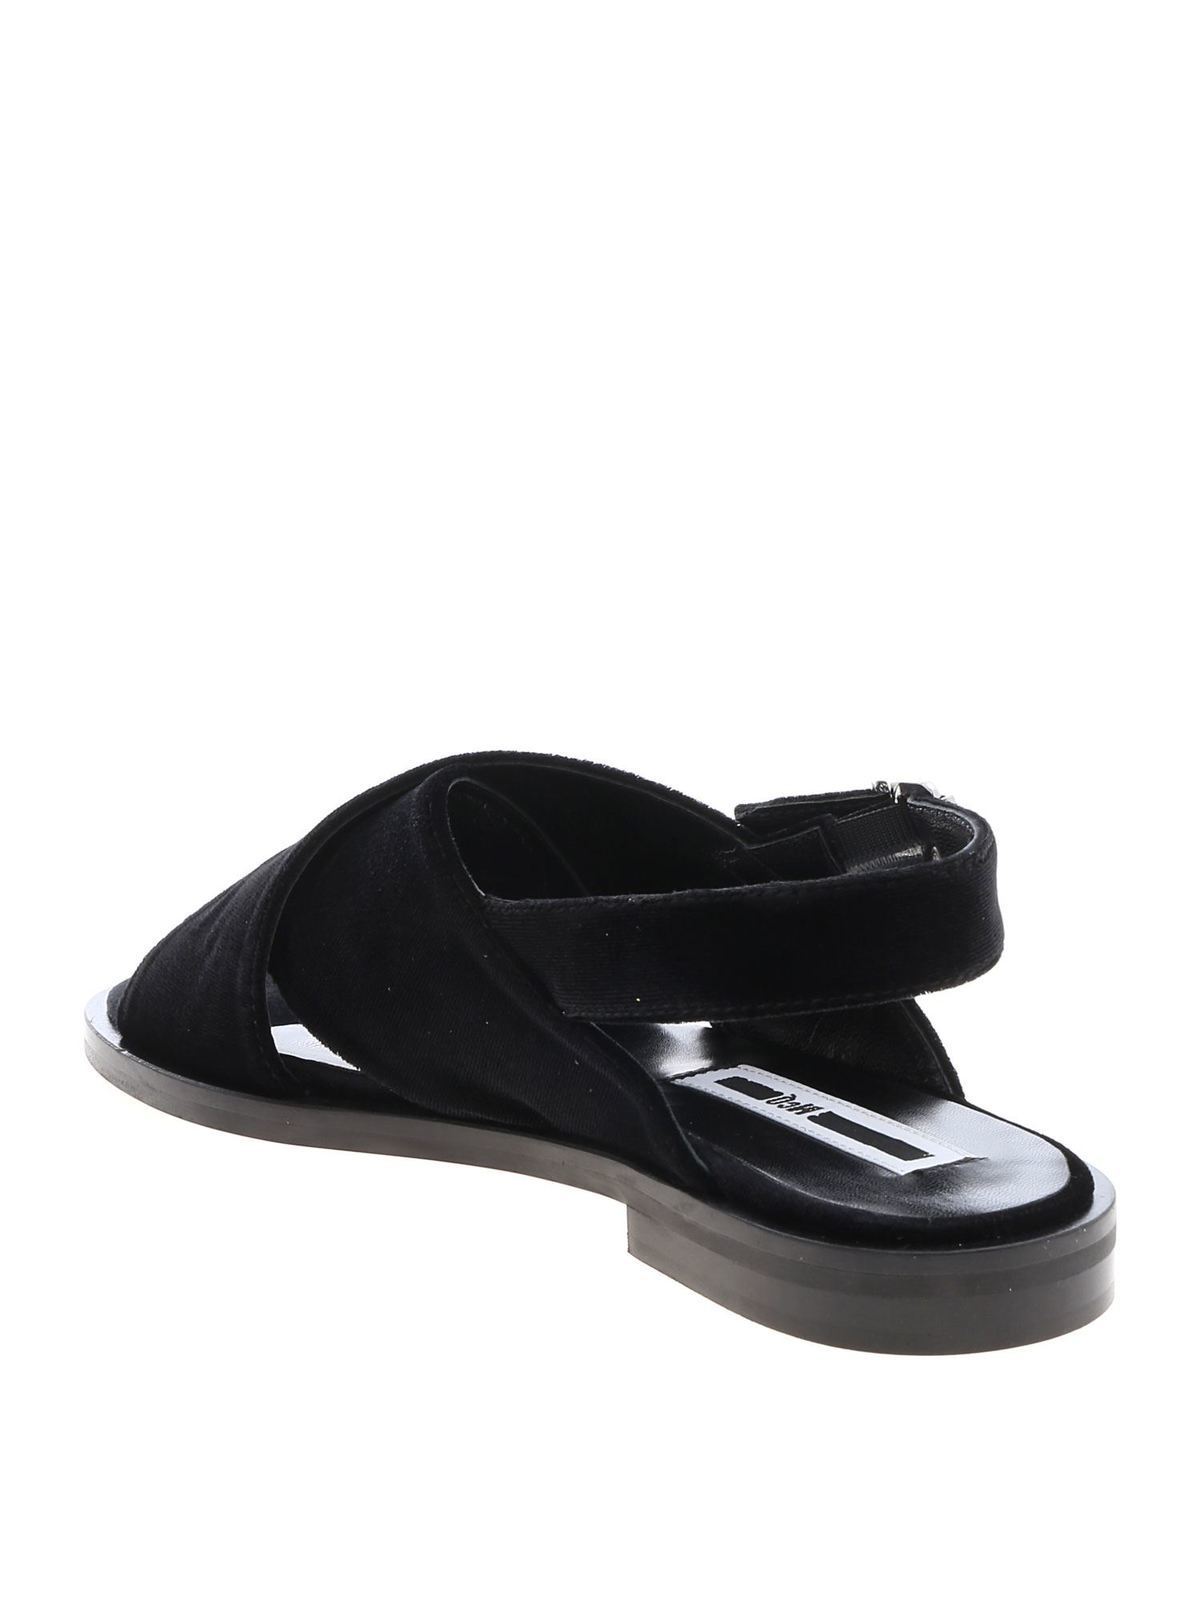 Shop Mcq By Alexander Mcqueen Kim Sandals In Black With Braided Bands In Negro